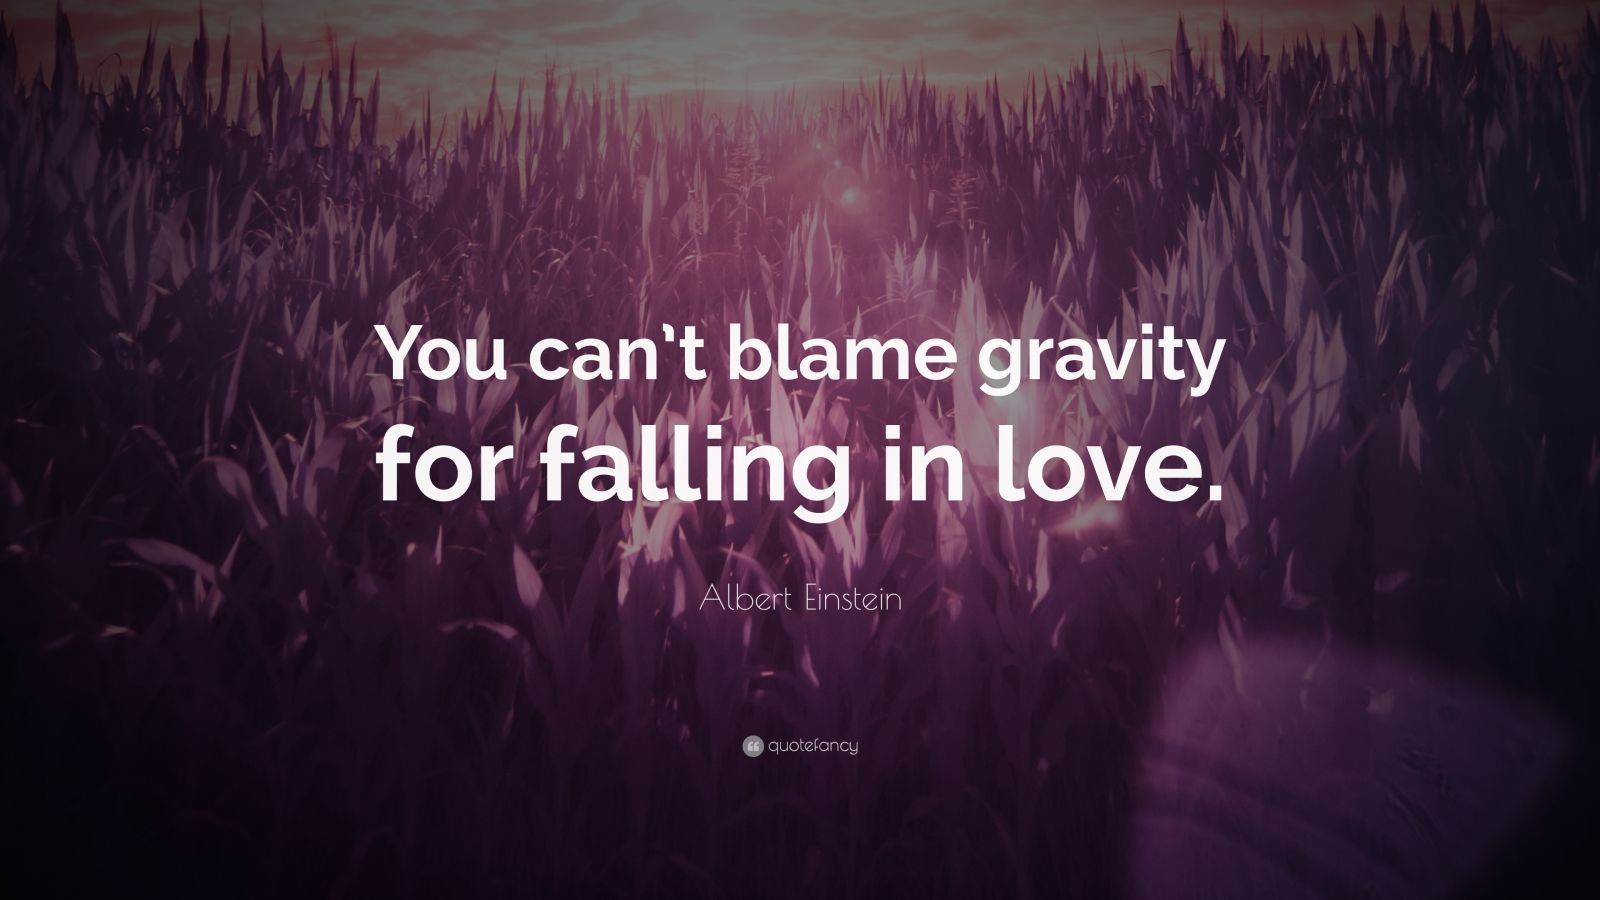 Albert Einstein Quote: “You can’t blame gravity for falling in love ...